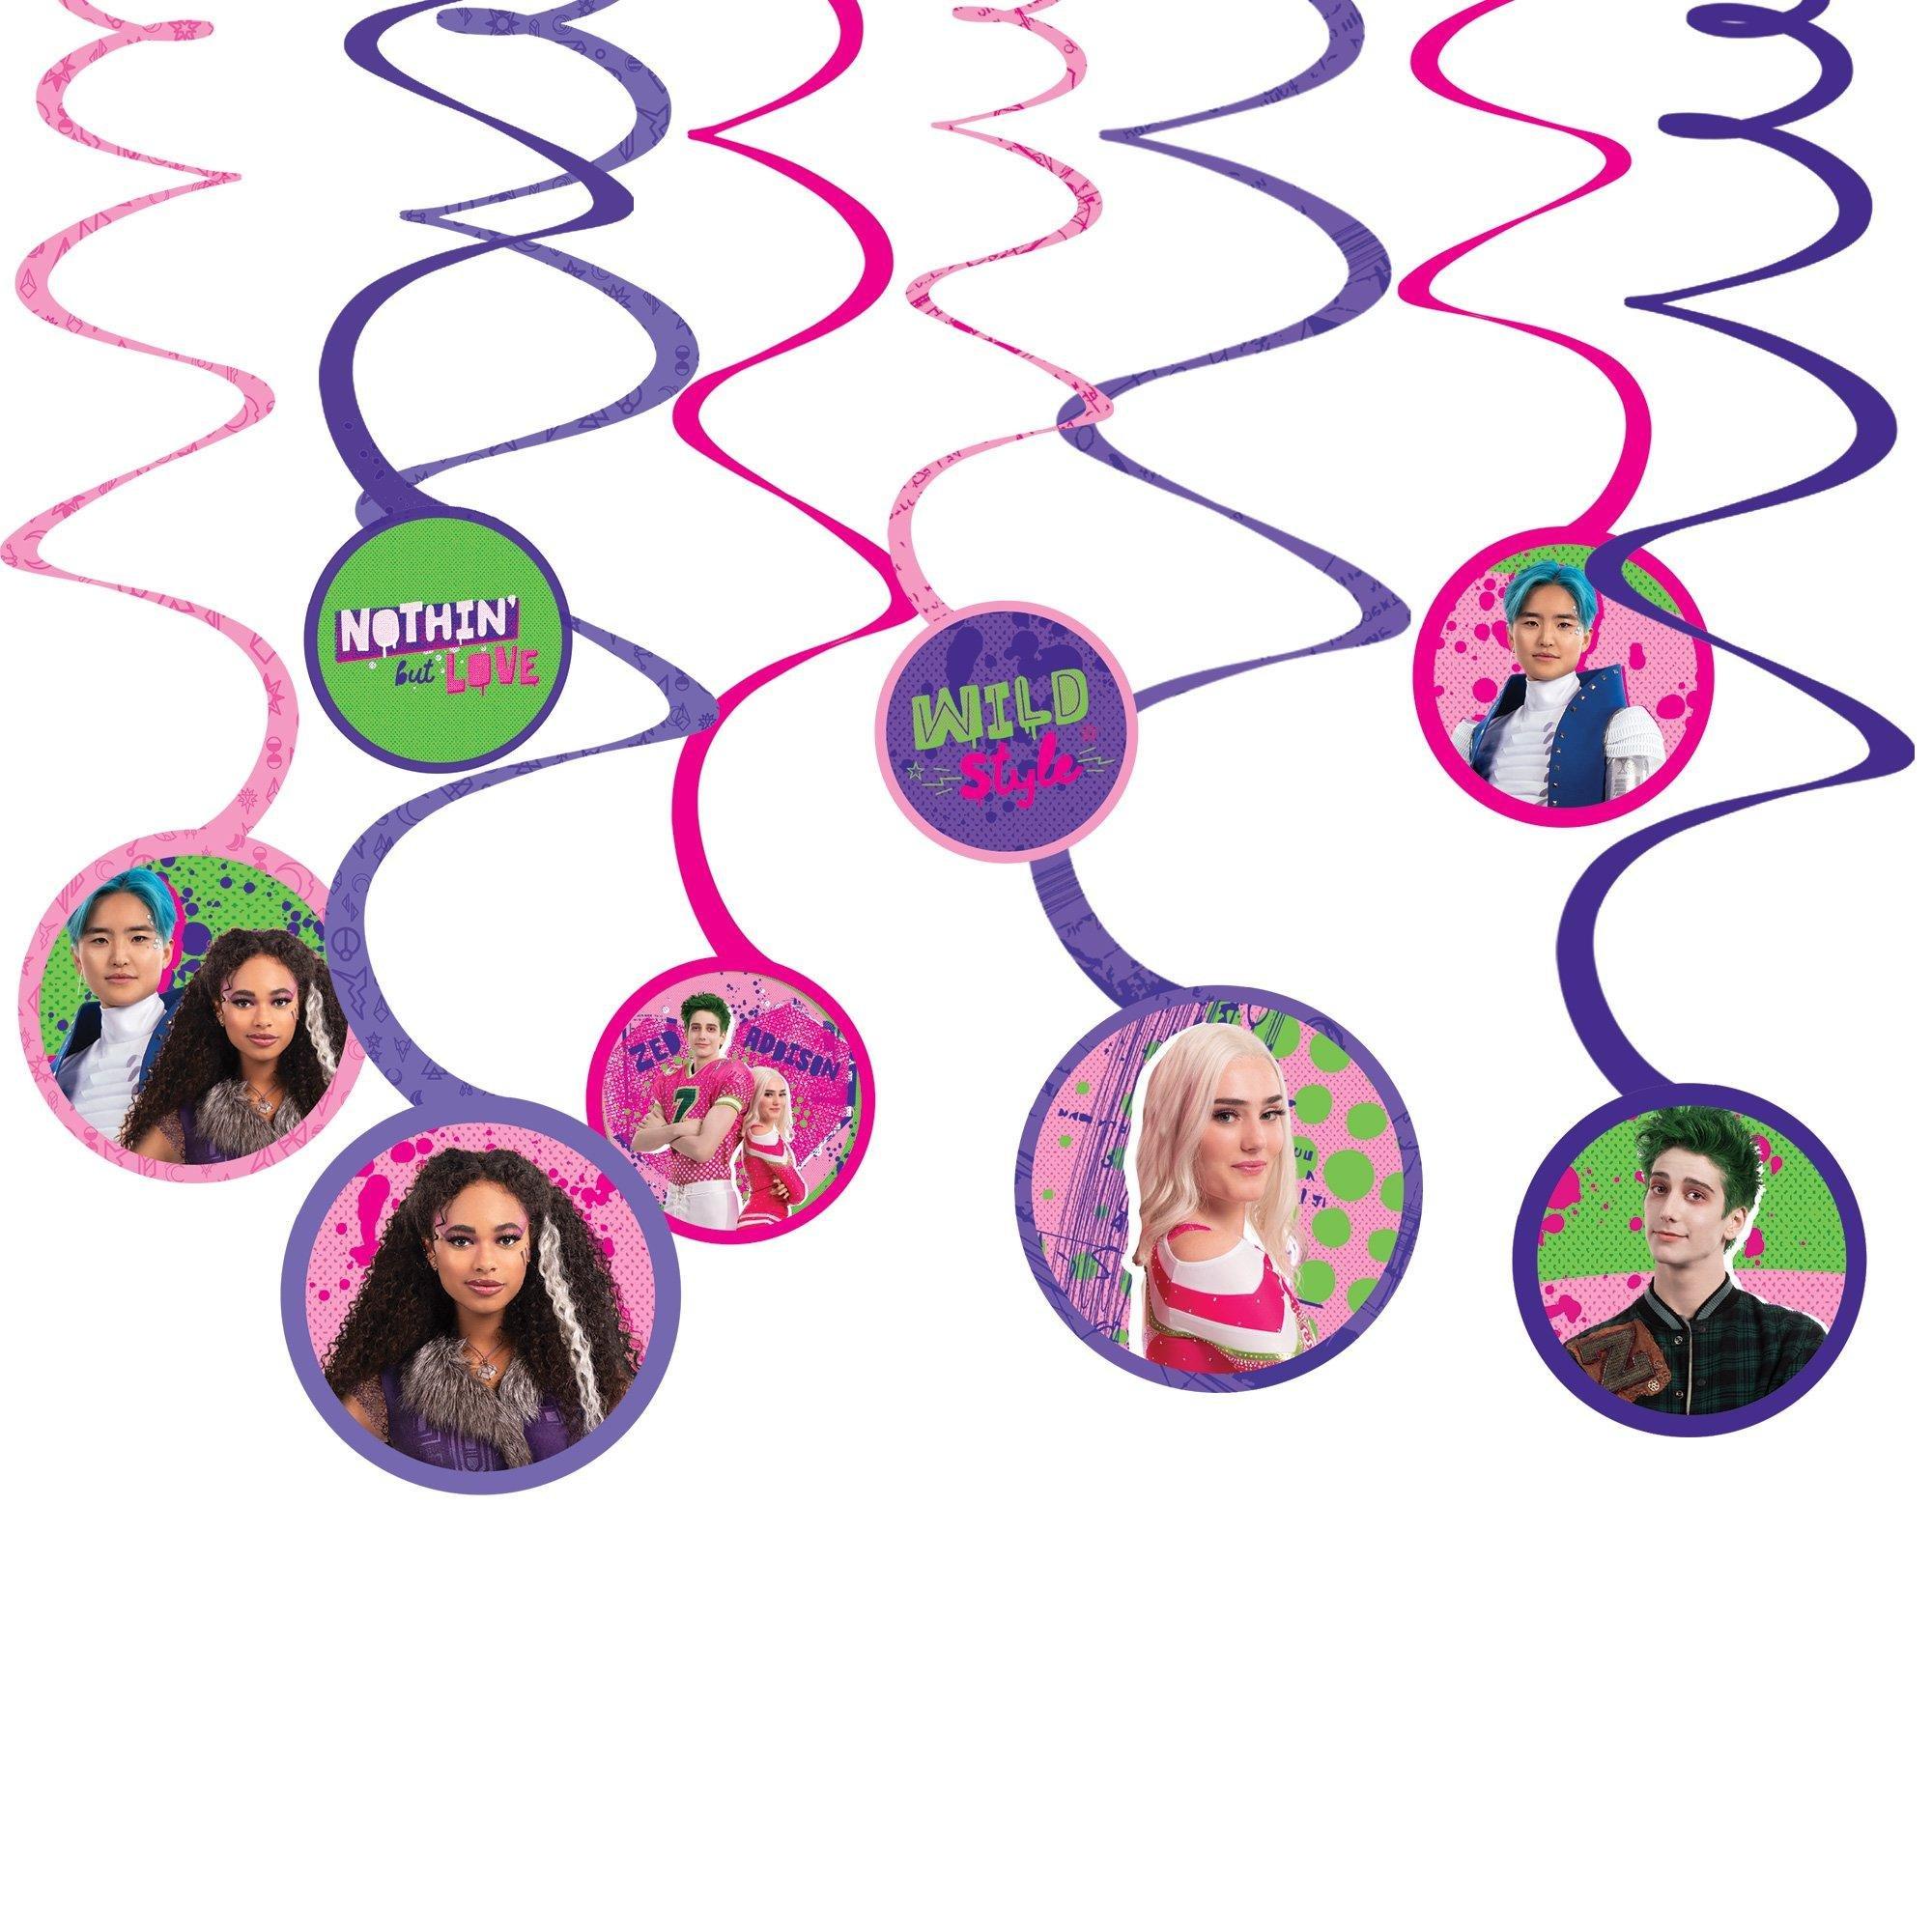 Disney ZOMBIES 3 Party Decorating Supplies Pack - Kit Includes Themed Latex Balloons, Table Decorations, Swirls, Scene Setter & Photo Booth Props